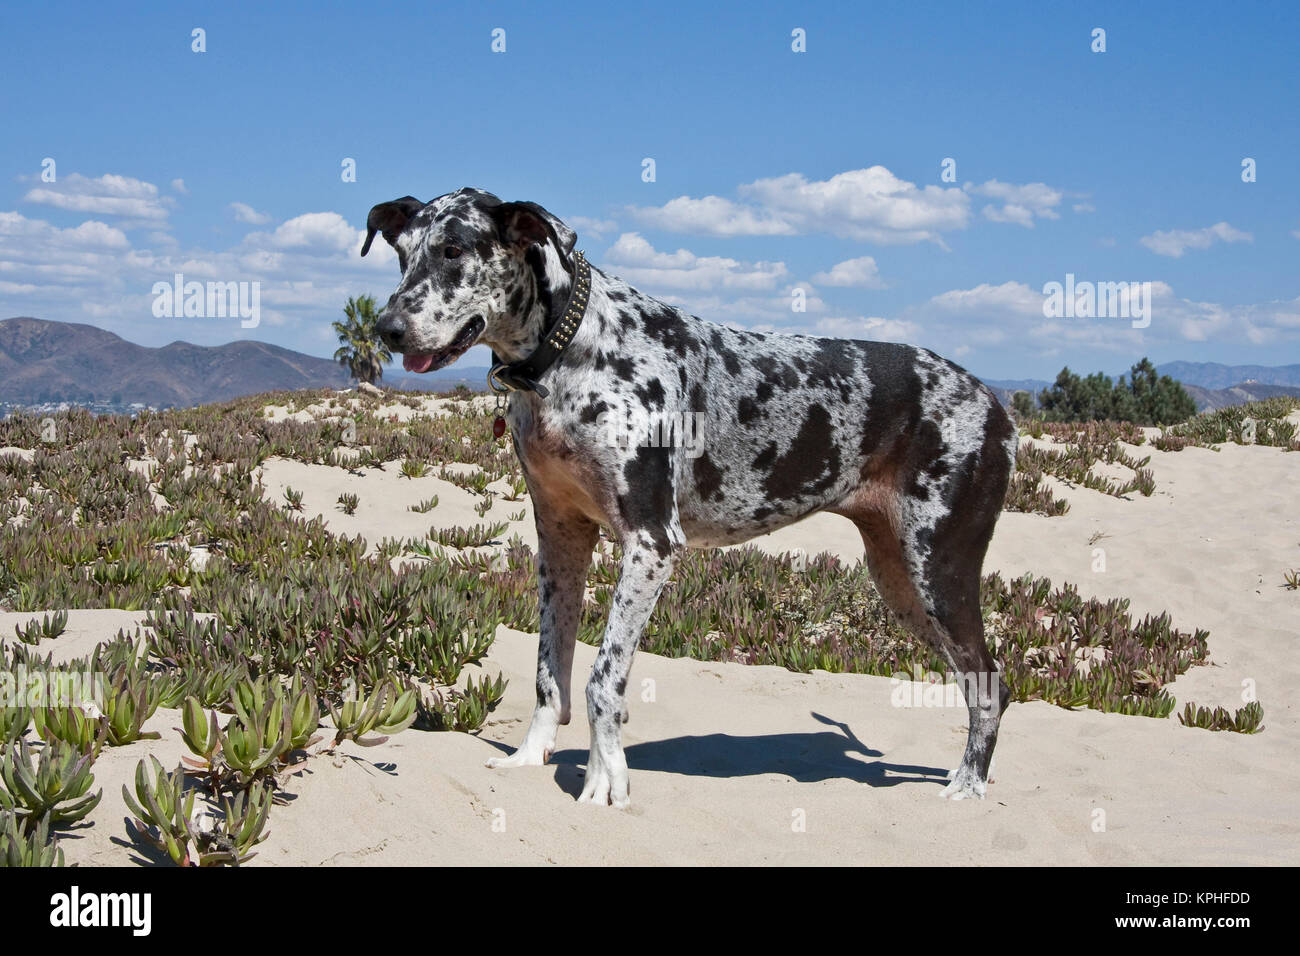 A Great Dane standing in sand at the Ventura Beach in California. Stock Photo